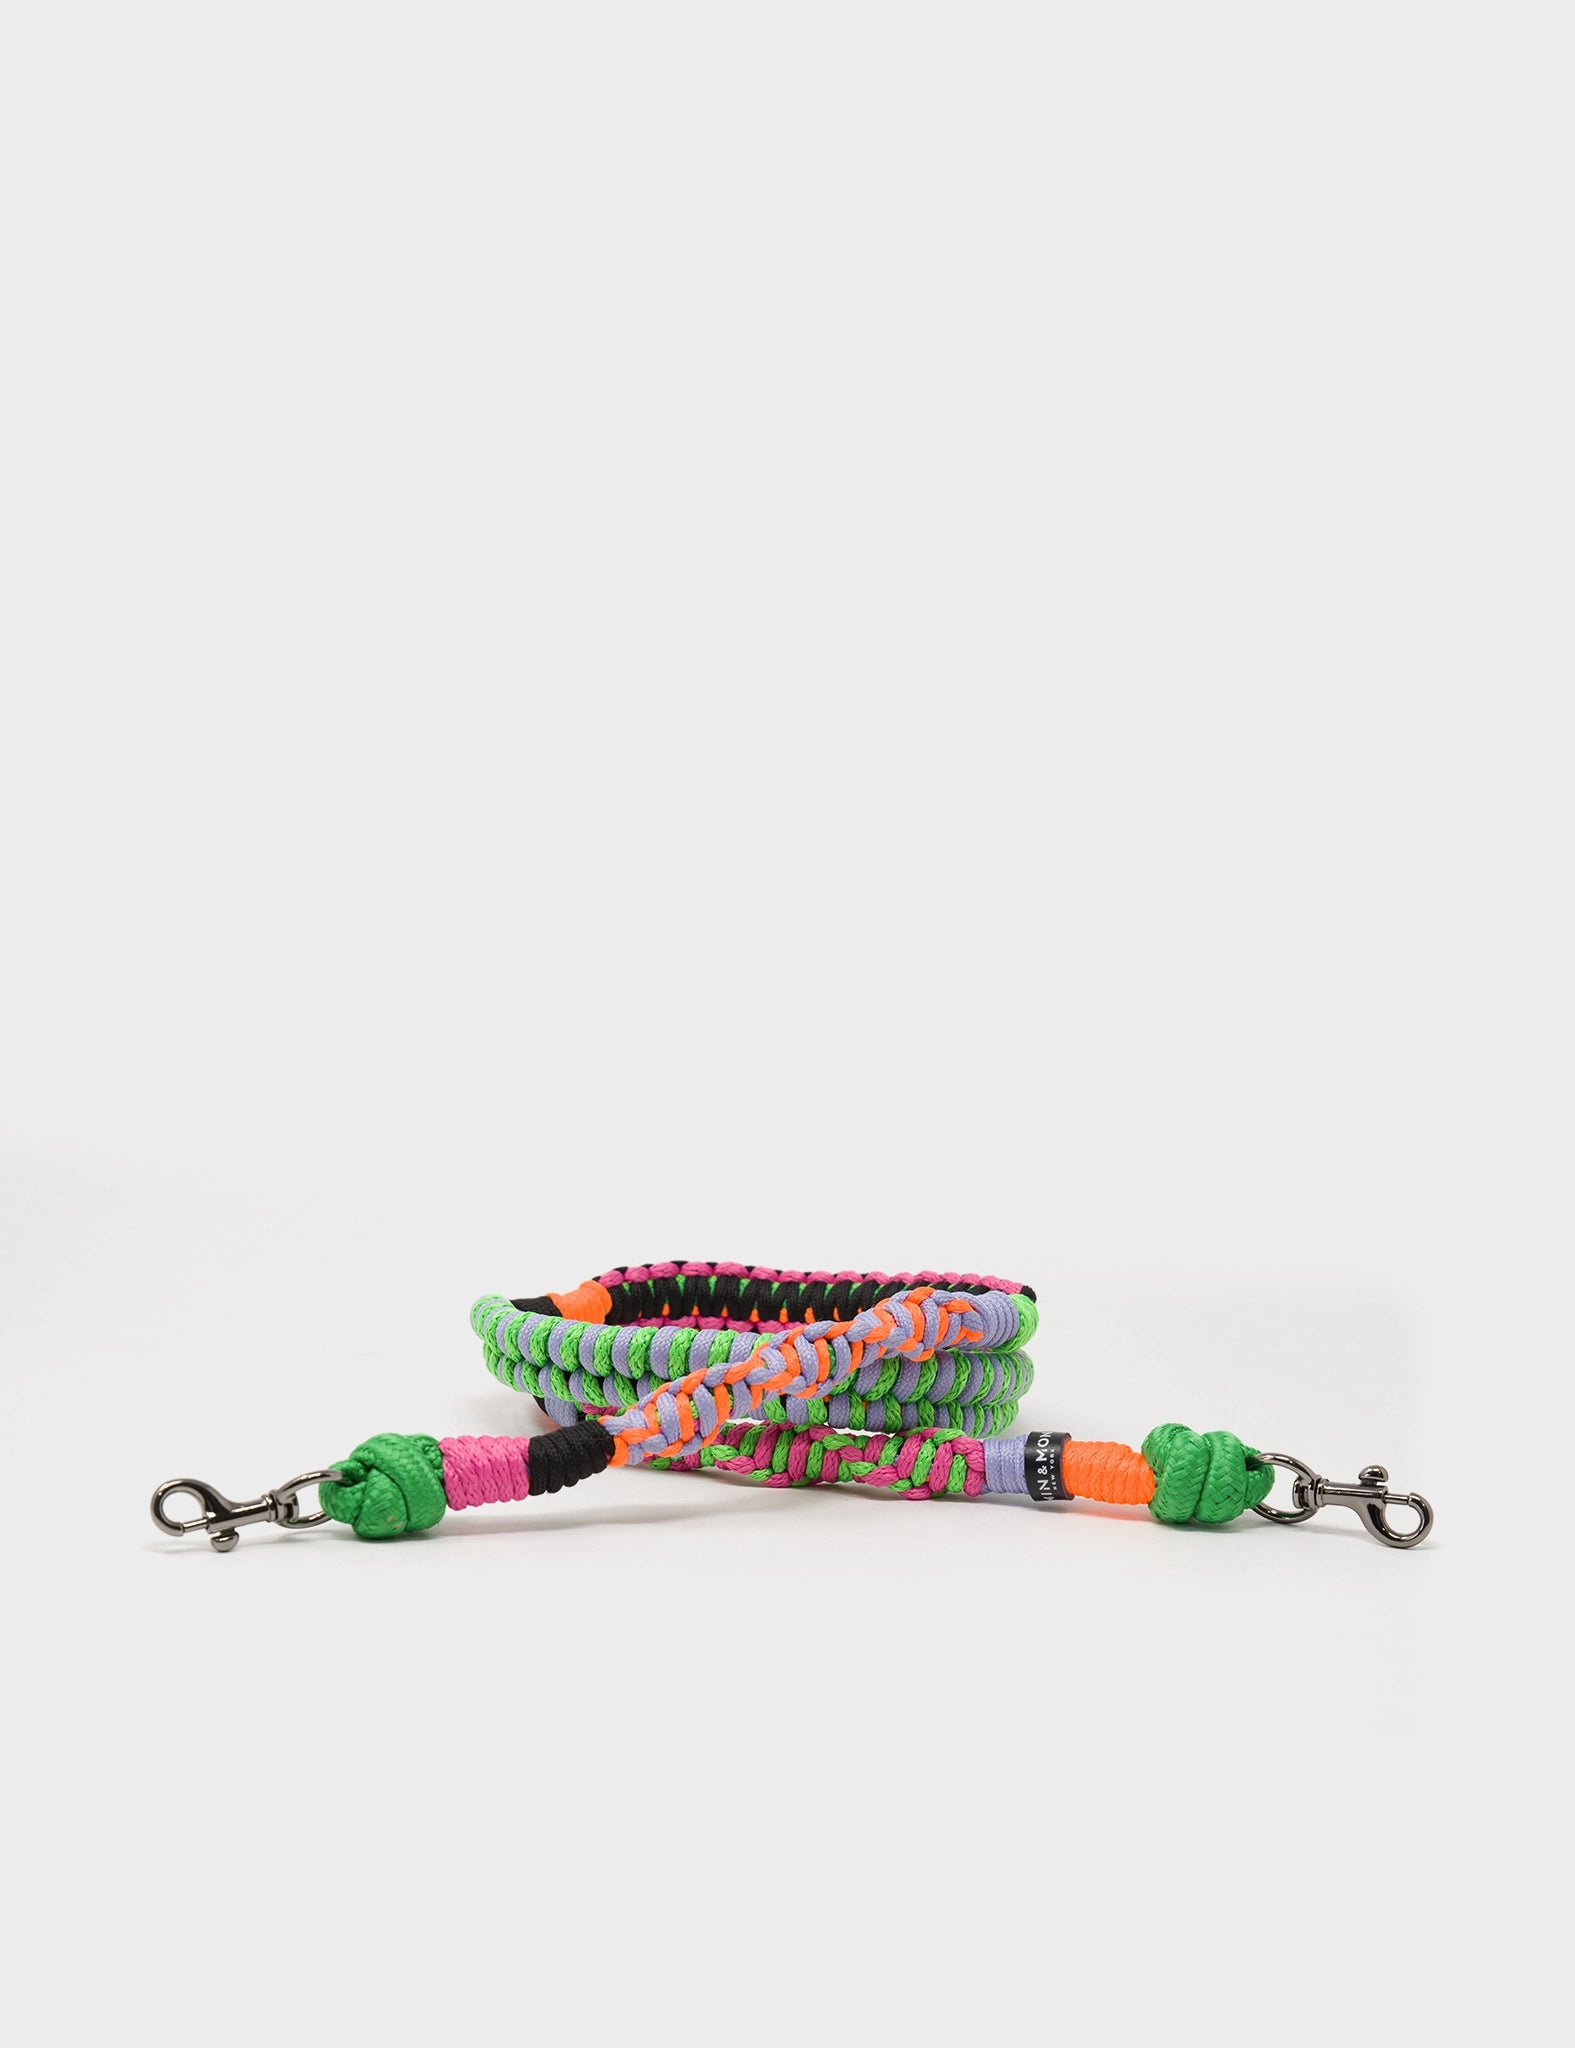 Interchangeable Handwoven Shoulder Strap - Biscay Green and Neon Colors - Detail 